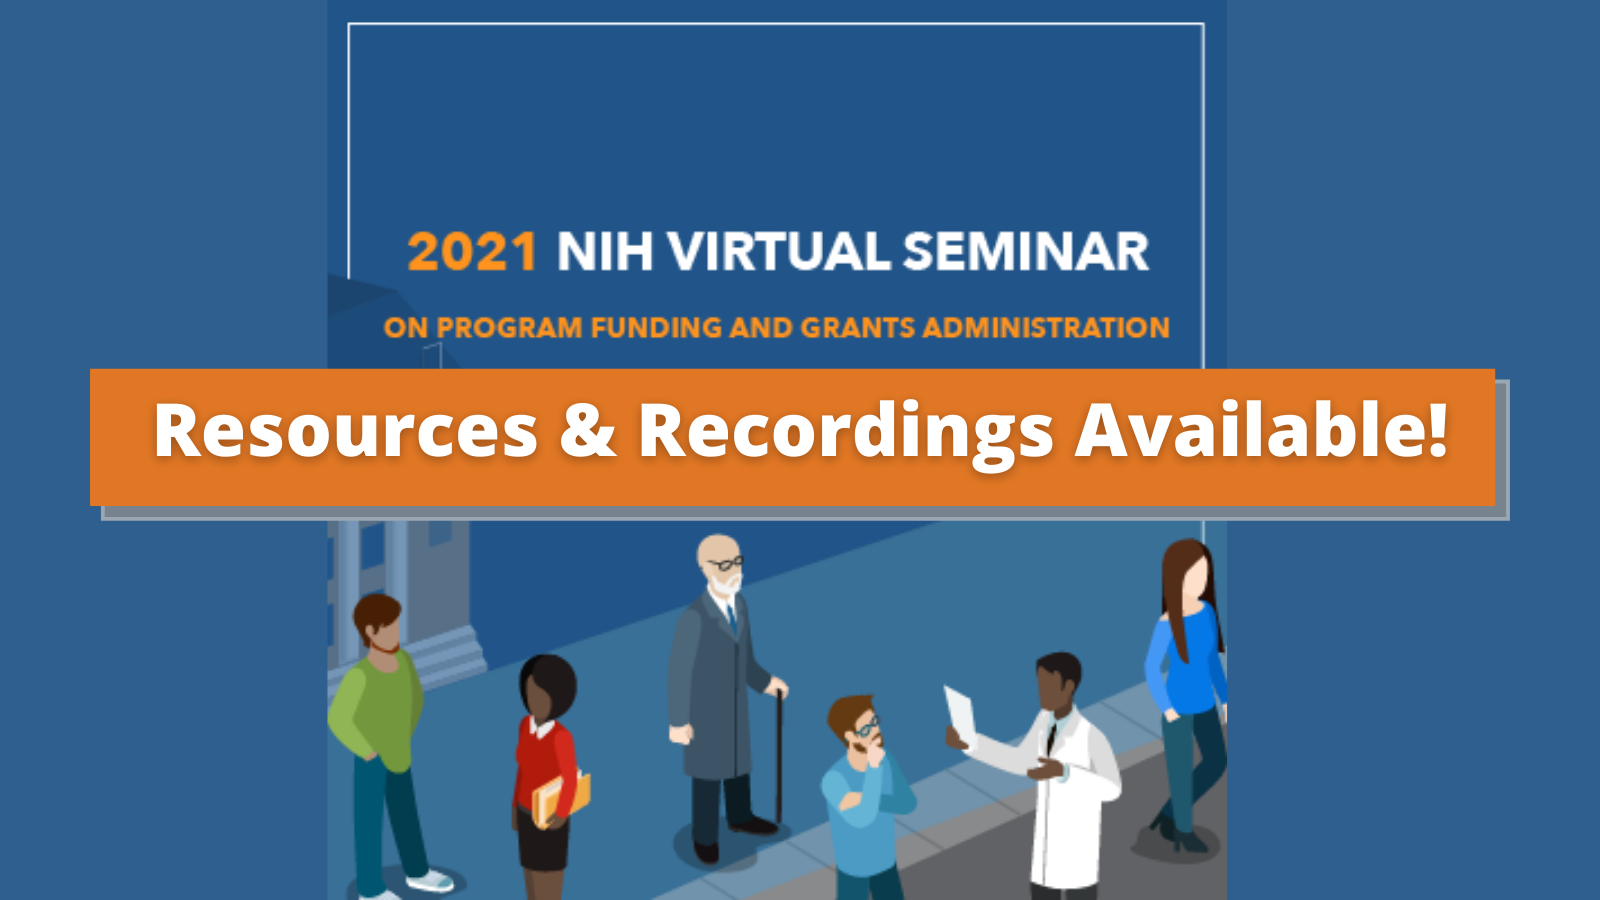 Resources Recordings Available from the Recent 2021 NIH Virtual